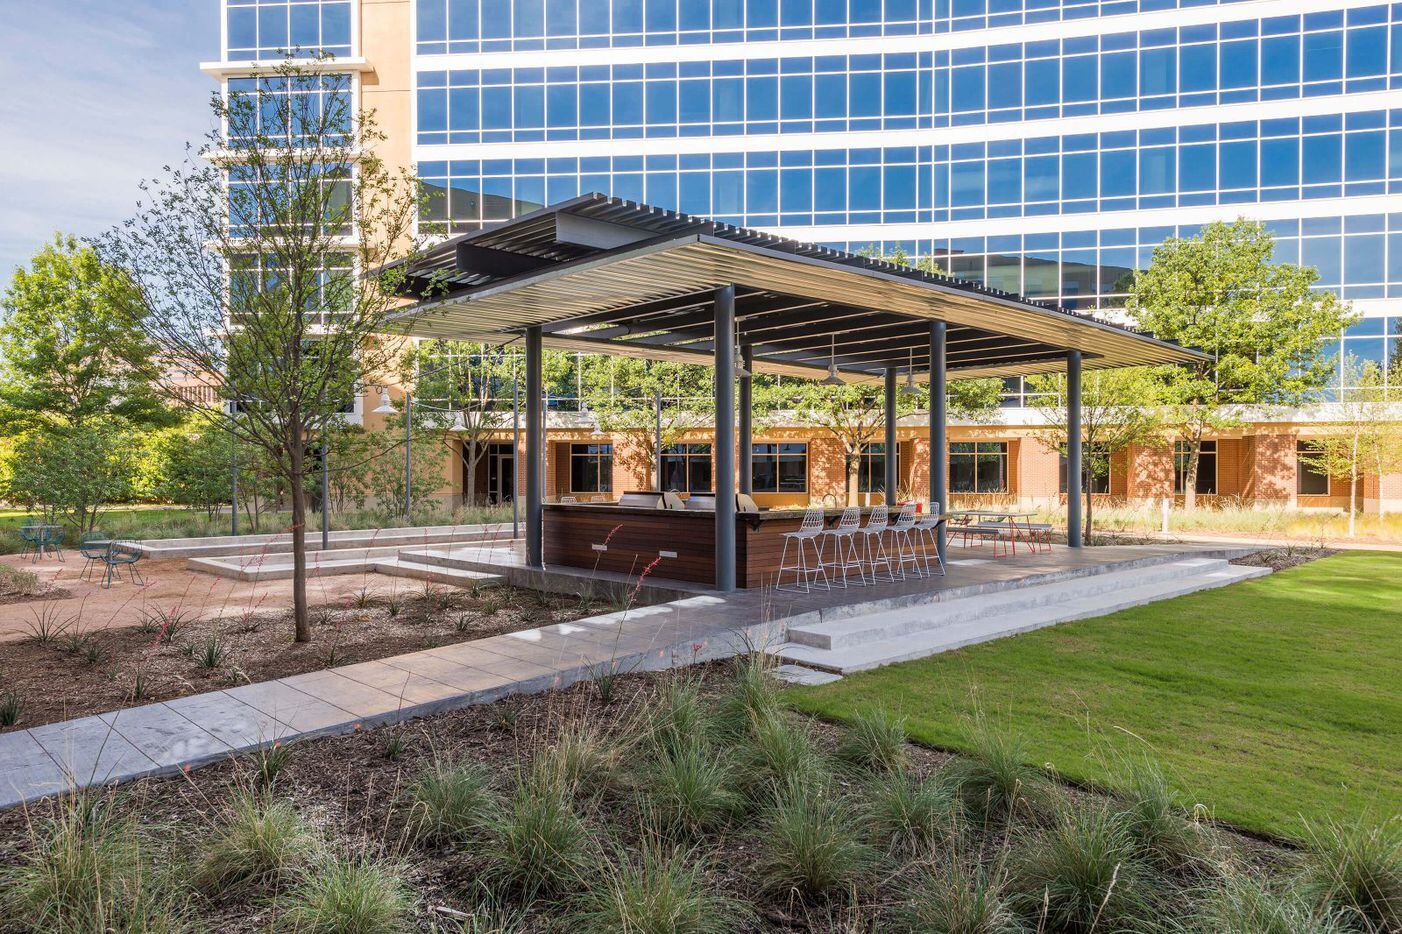 An outdoor serving bar and eating area are among the amenities at the Galatyn Commons office...